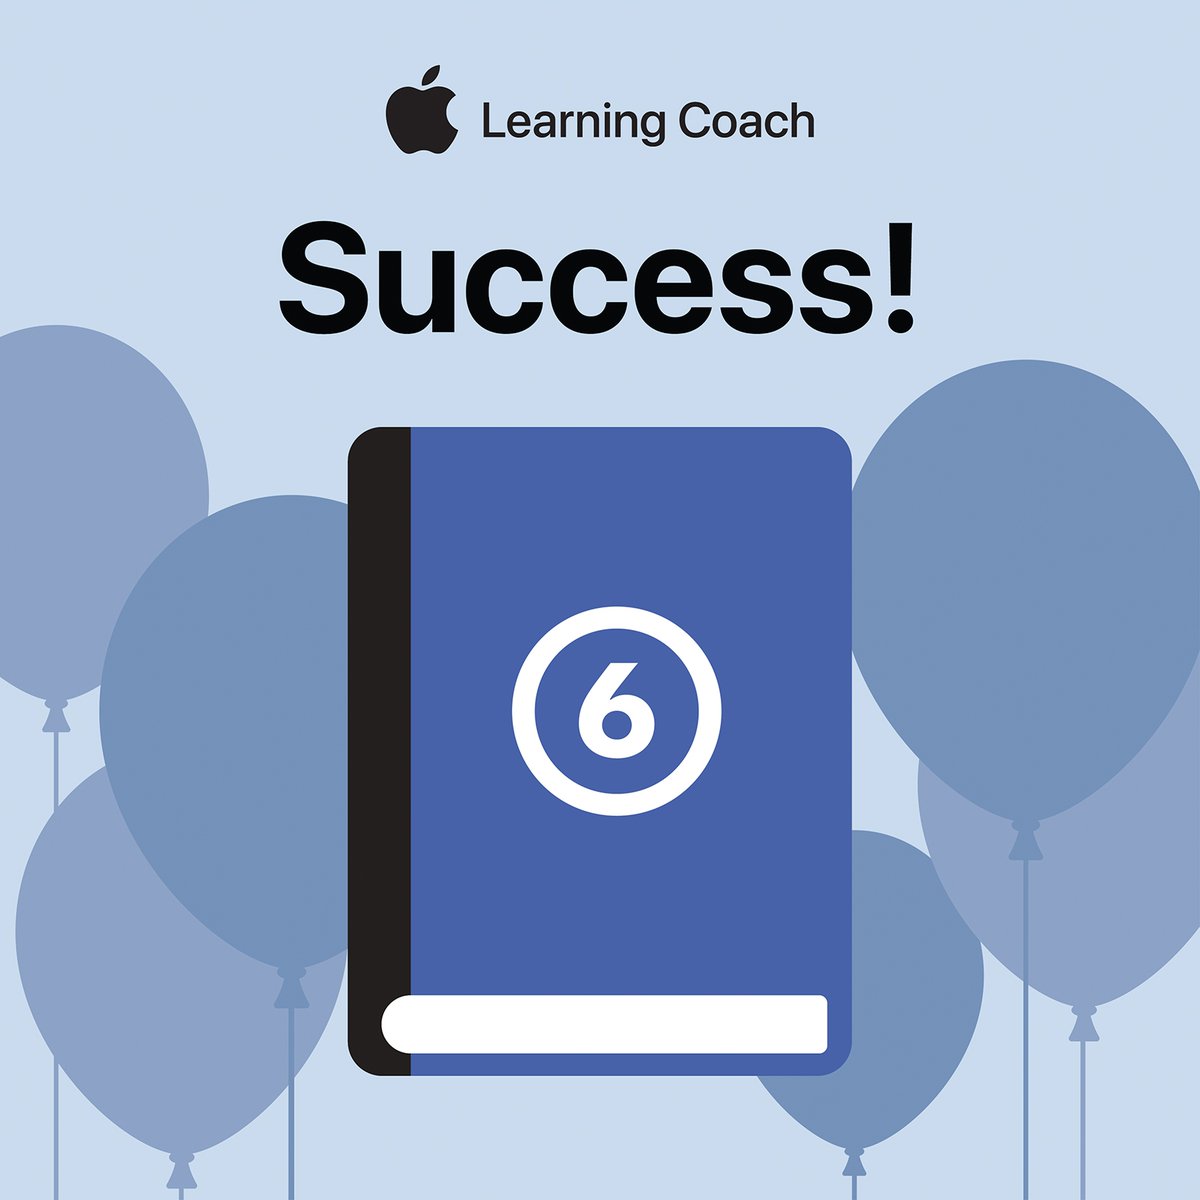 Done with unit 6 of 6! Took almost all summer, but I am finished with the Apple Learning Coach program. Thank you, Apple Education!  #AppleLearningCoach #Apple #BPSD #BPSDInnovators #InnovationVanguard #OCCUE